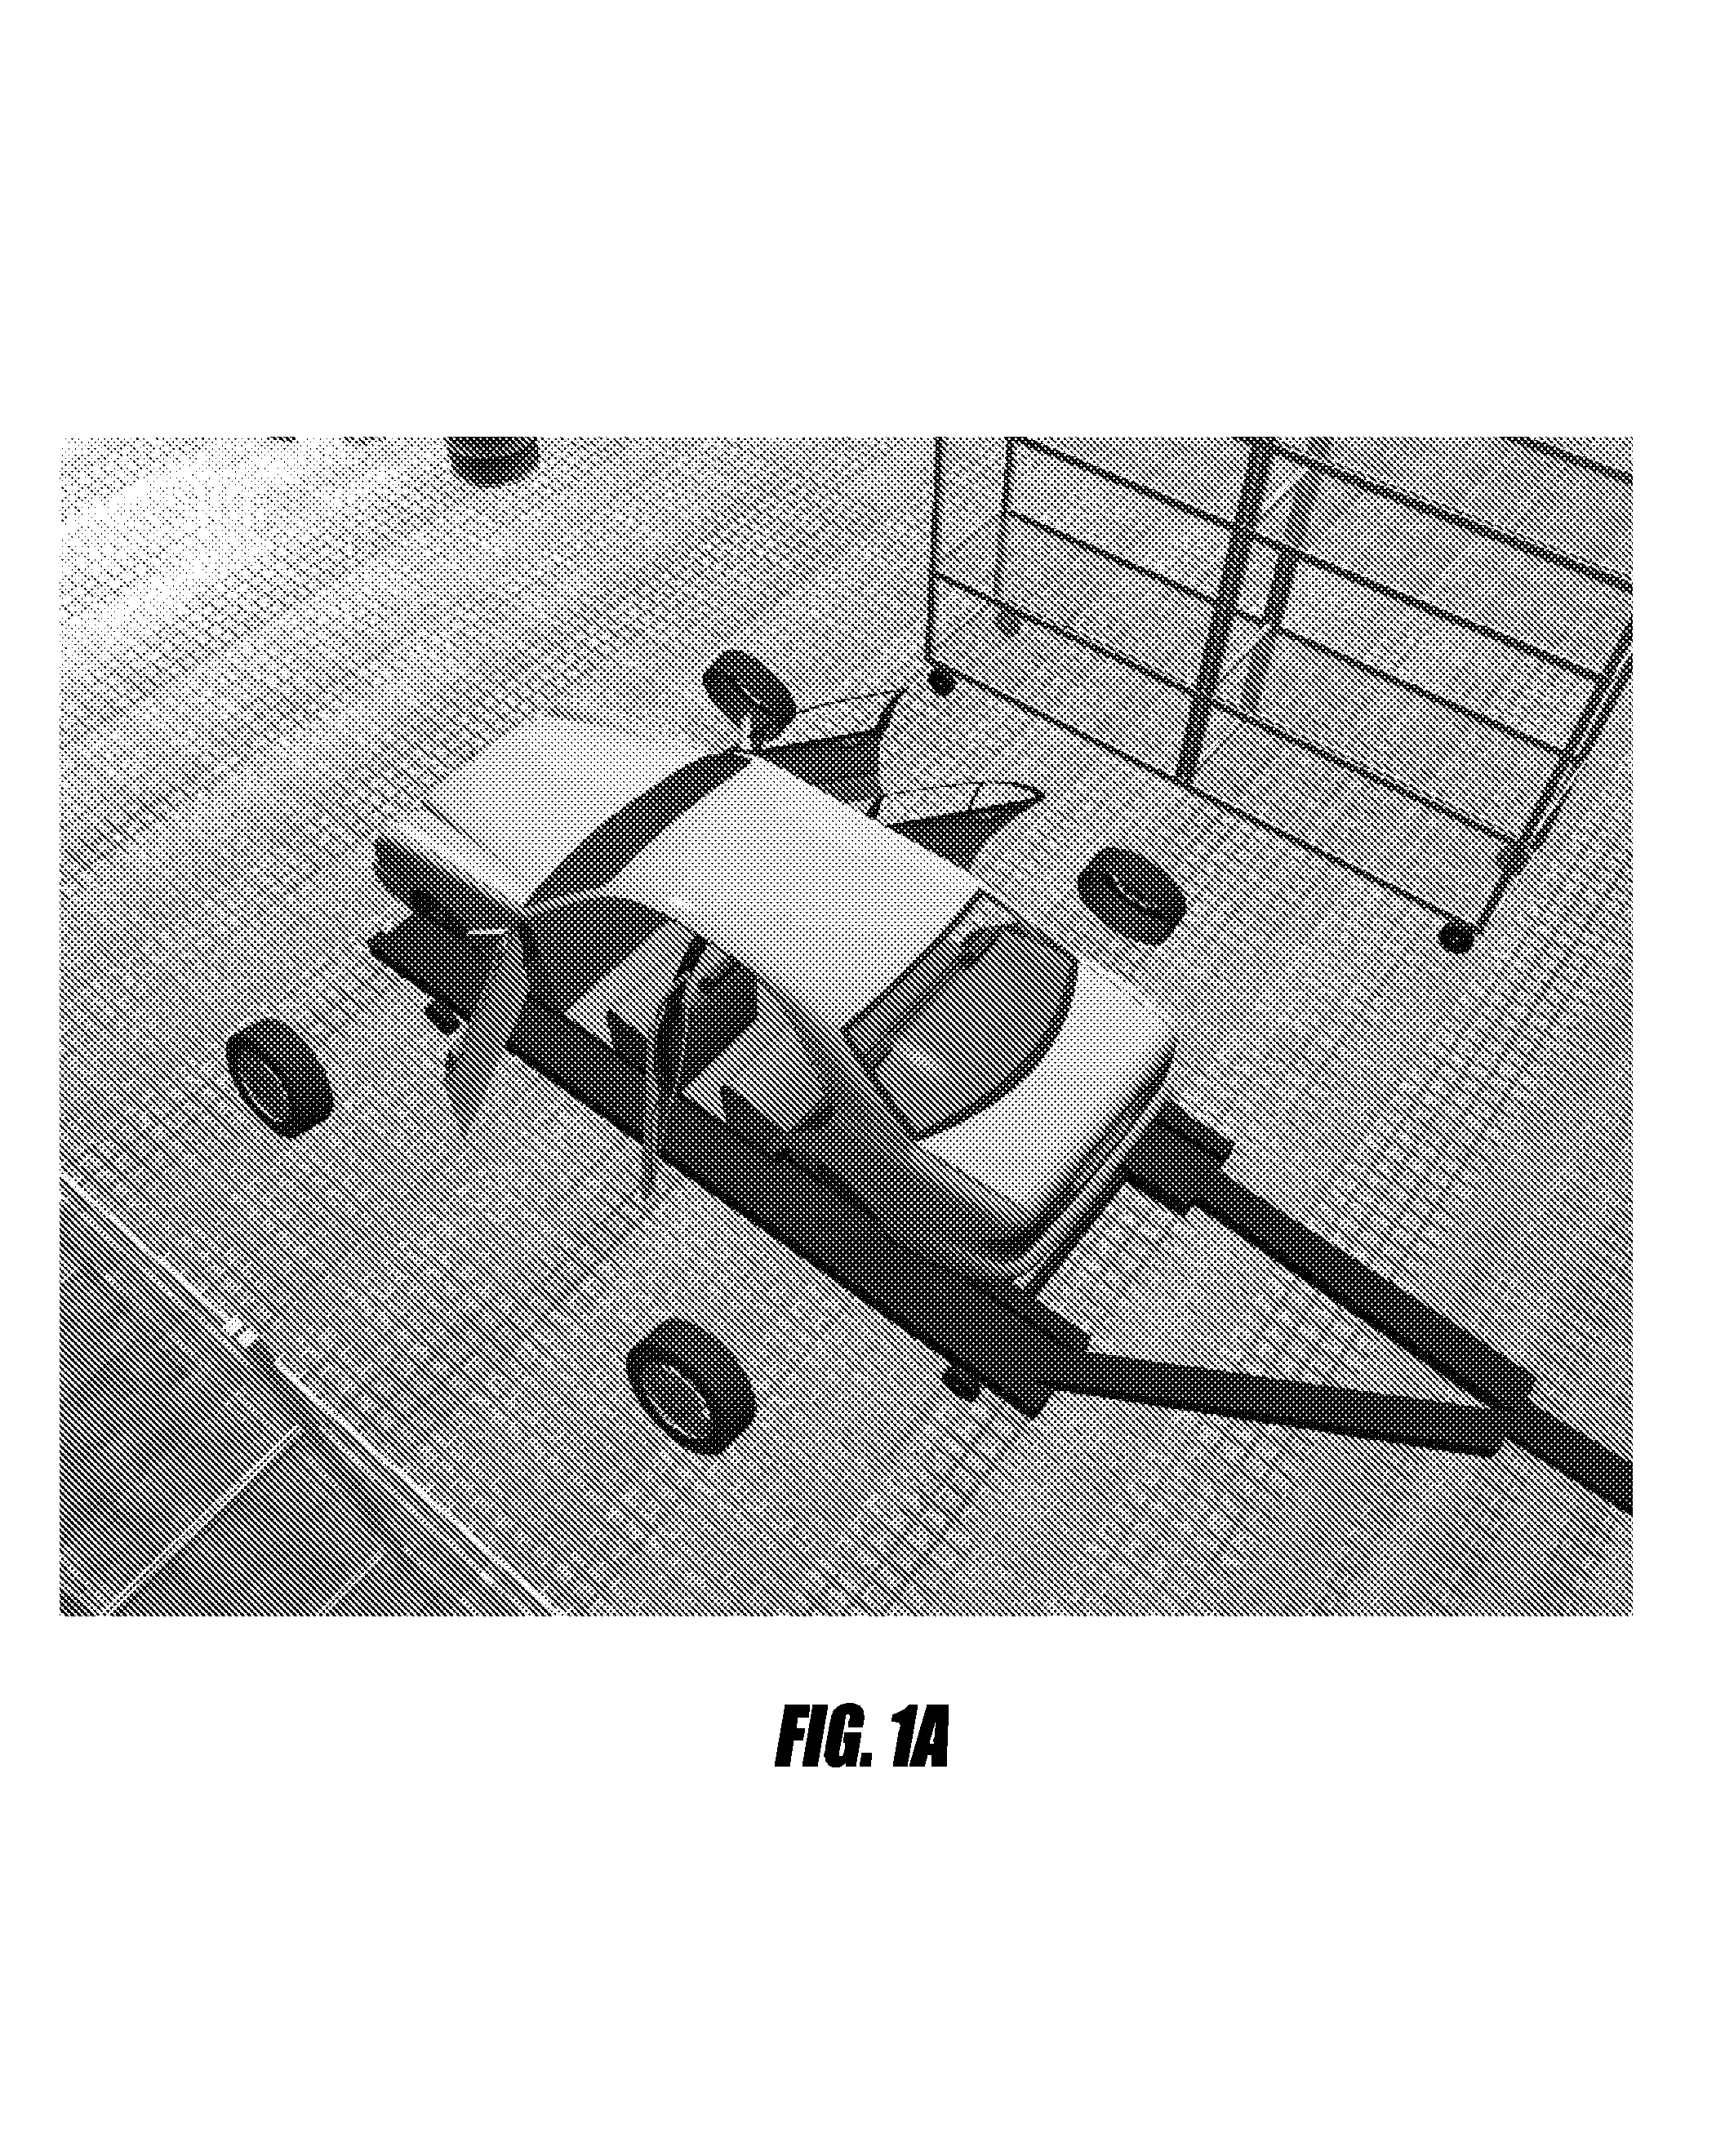 Method of disassembling an automobile